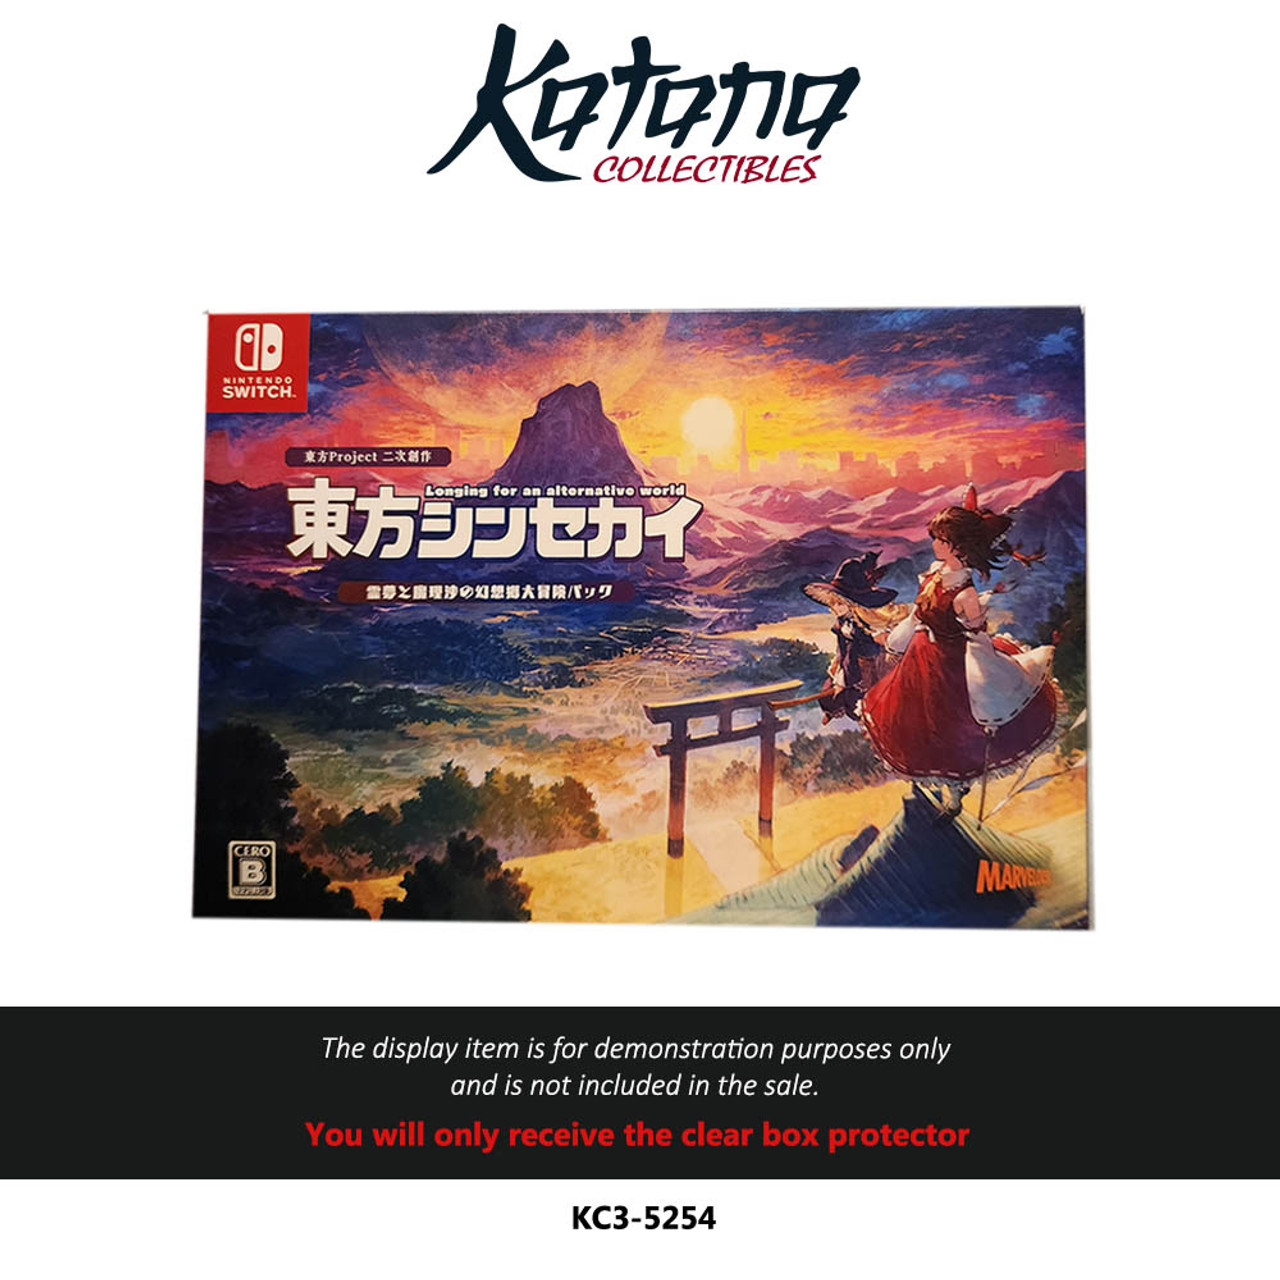 Katana Collectibles Protector For Touhou Shinsekai: Longing for An Alternative World [LE for Nintendo Switch] by Marvelous